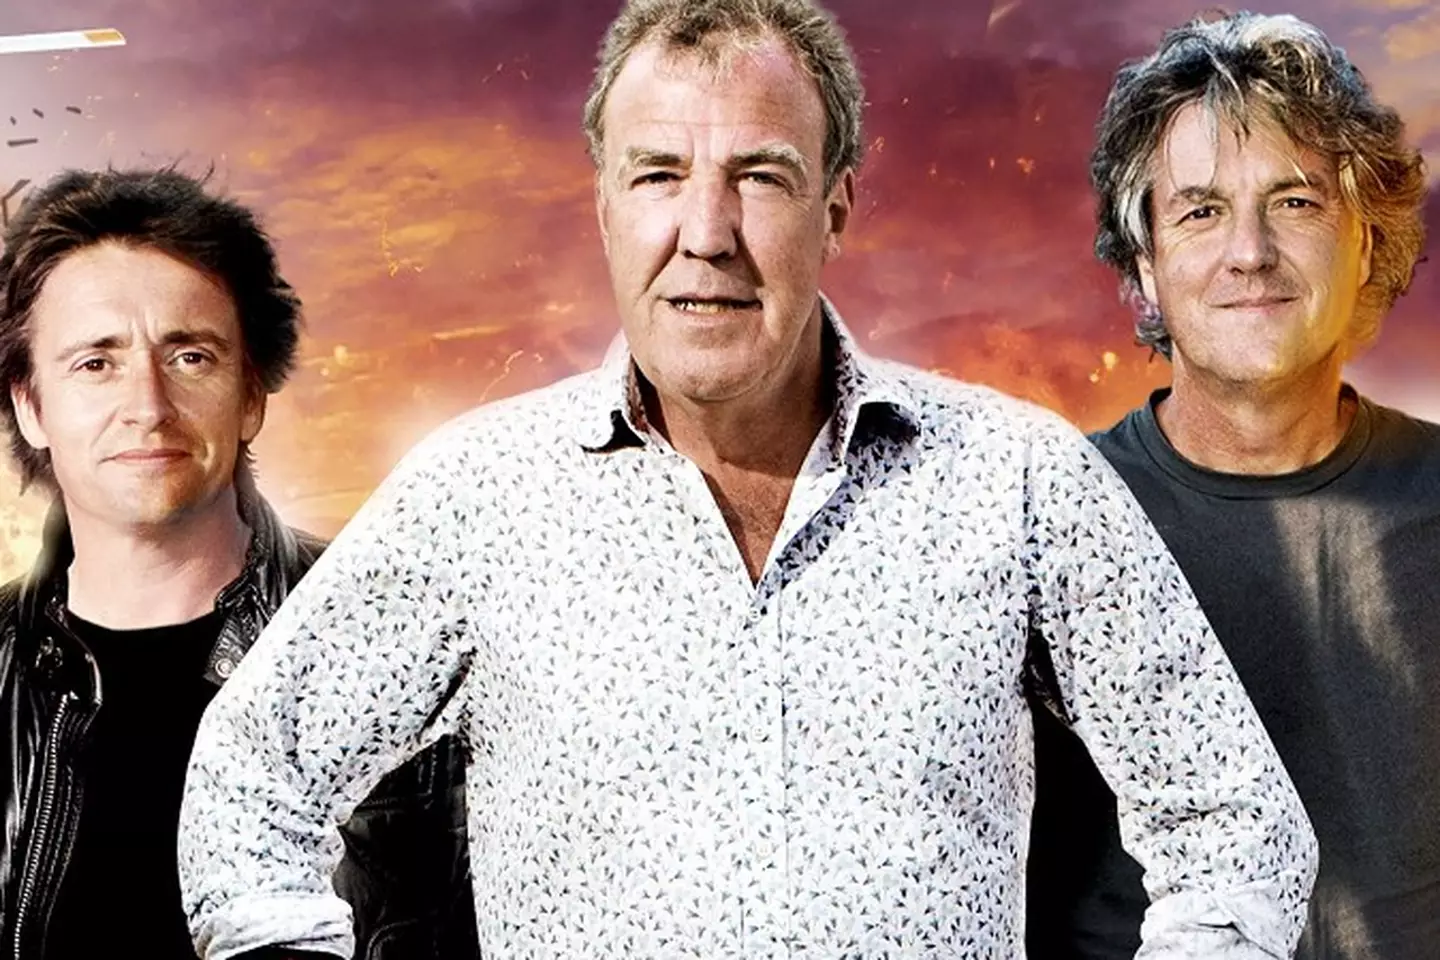 James May, Jeremy Clarkson, and Richard Hammond on Top Gear.